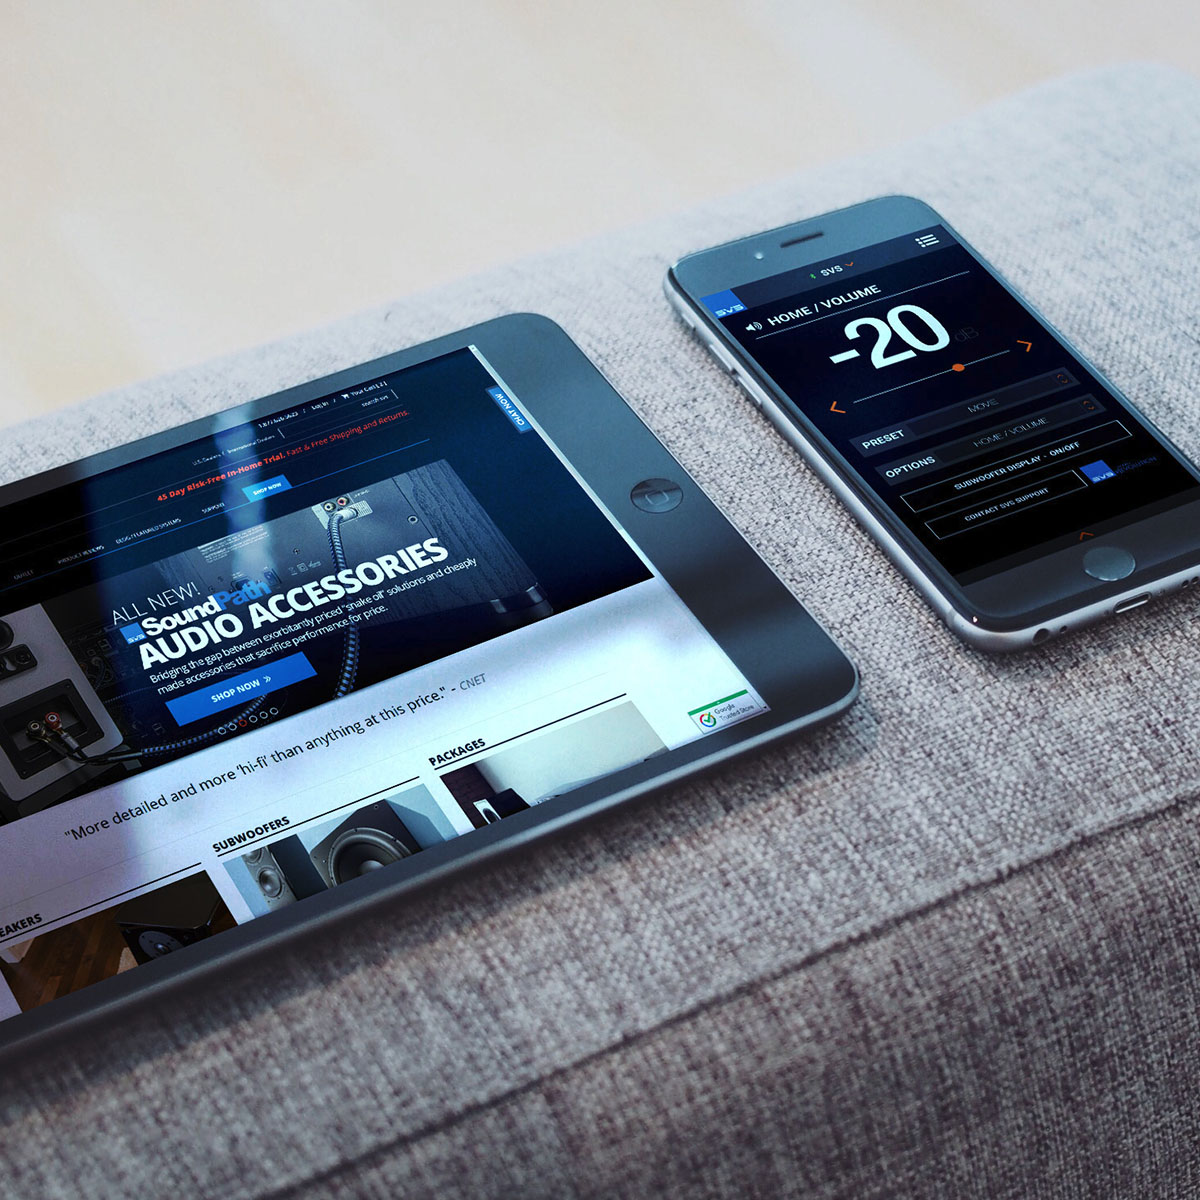 SVS 3000 Micro Subwoofer app on ipad and iphone